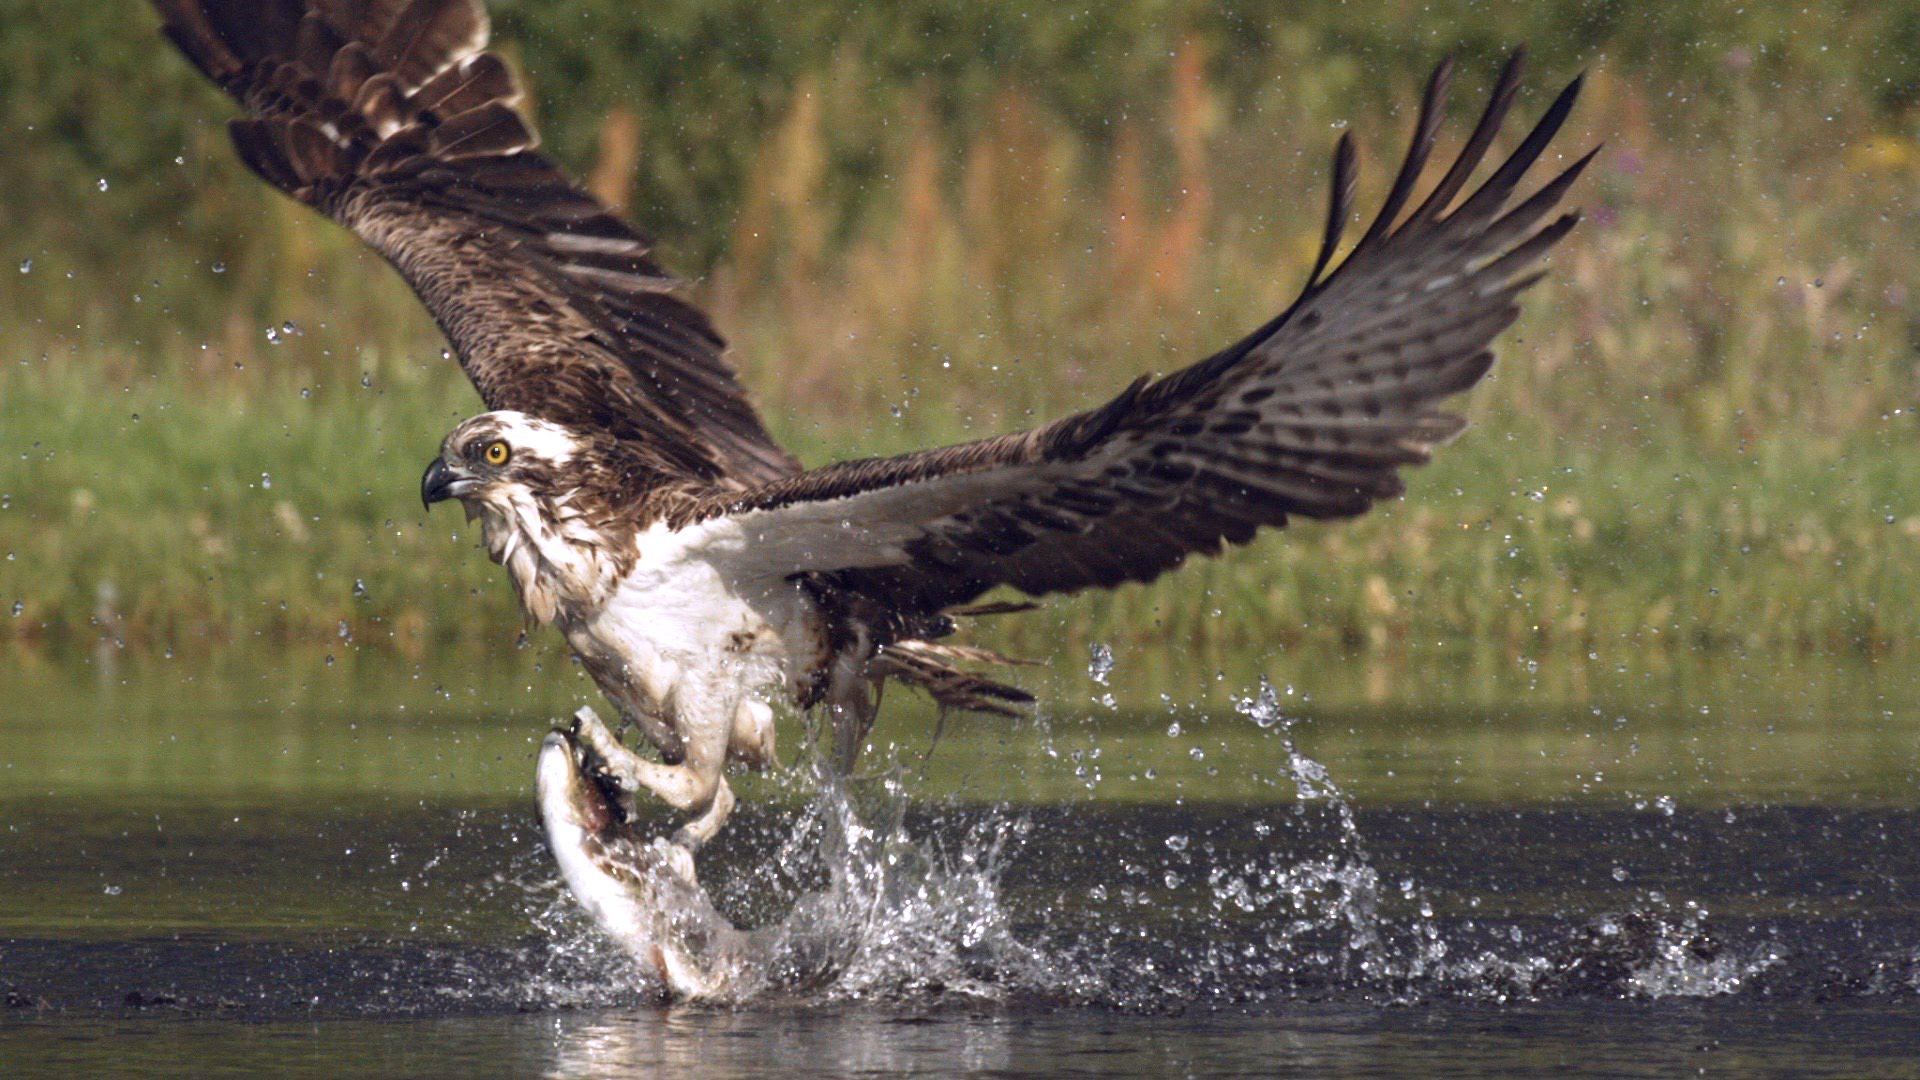 An osprey fishing in spectacular super slow motion | Highlands ...